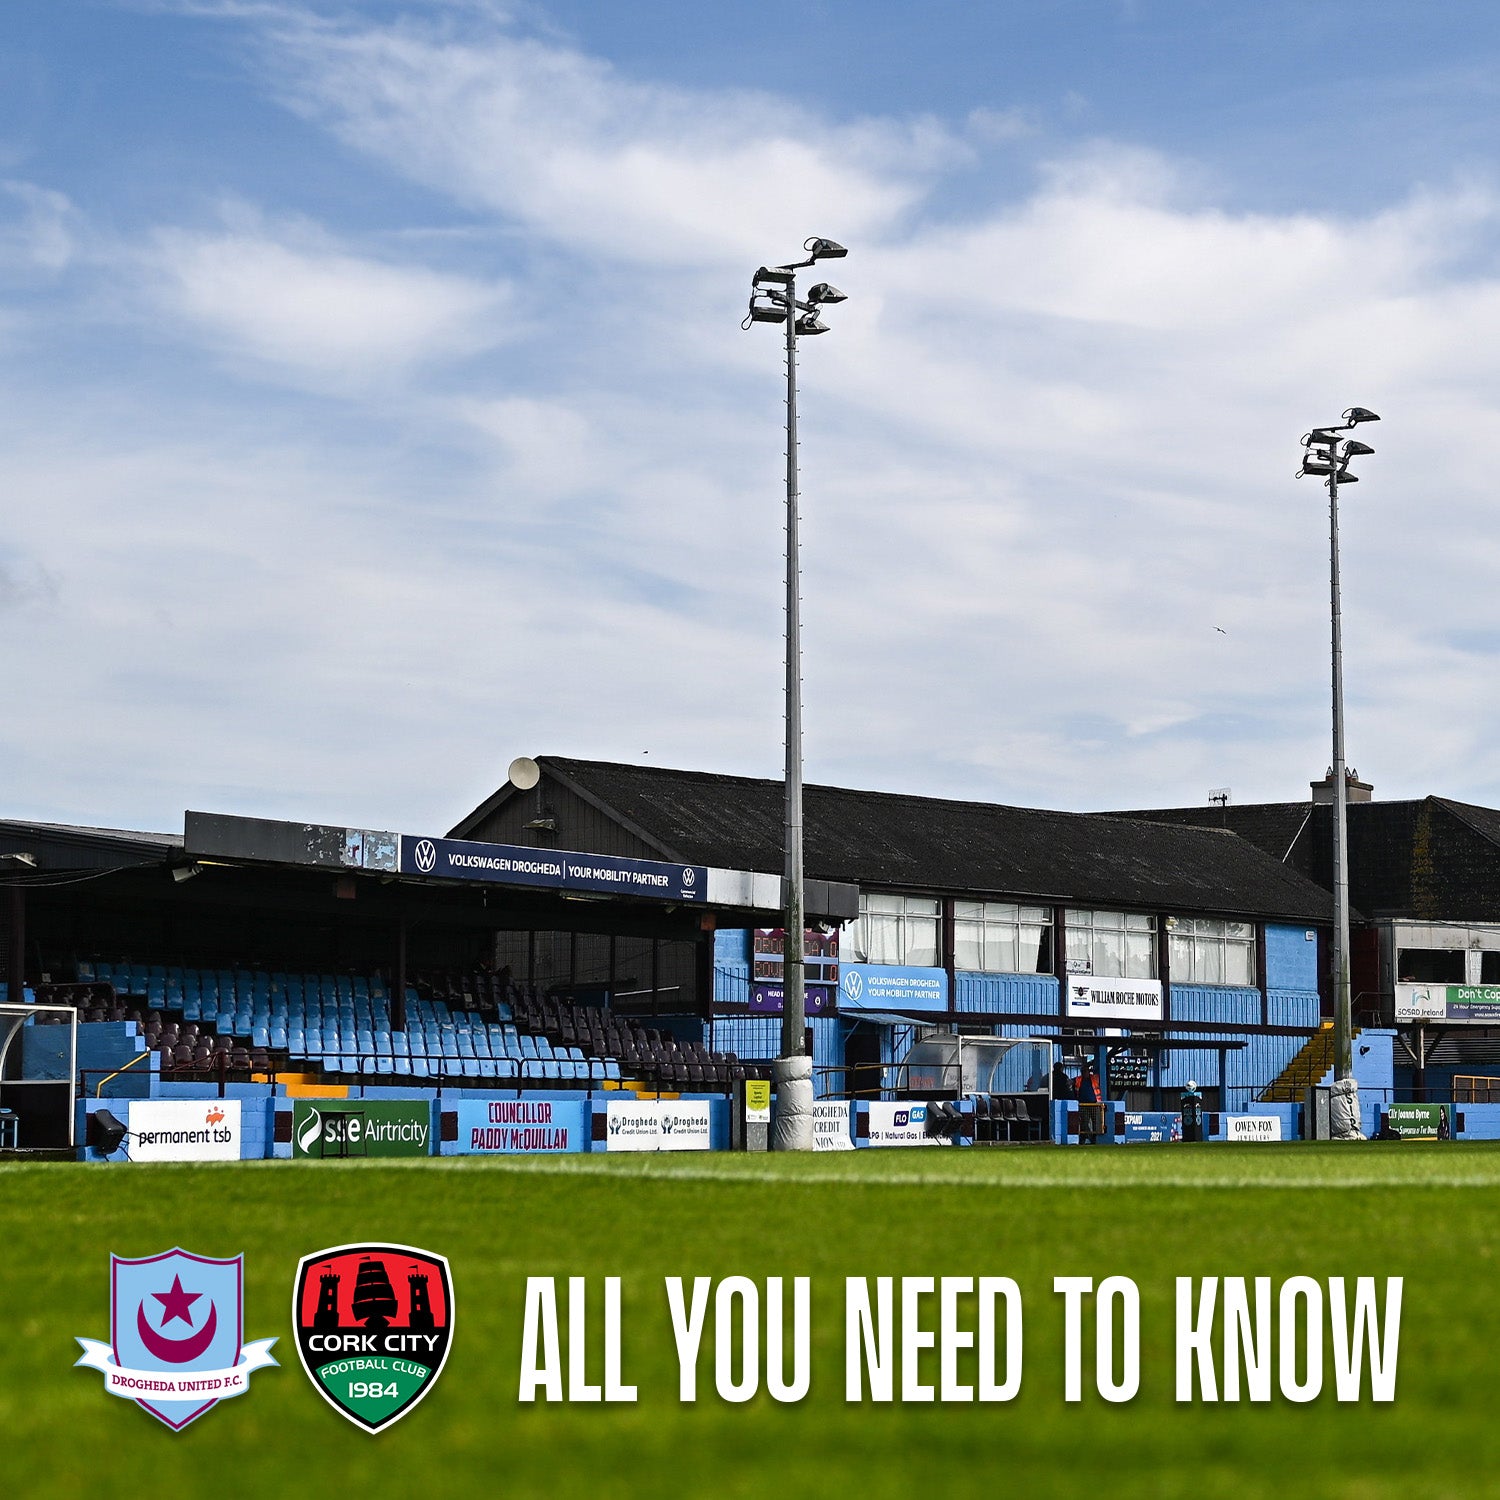 Drogheda United vs City: All You Need To Know!